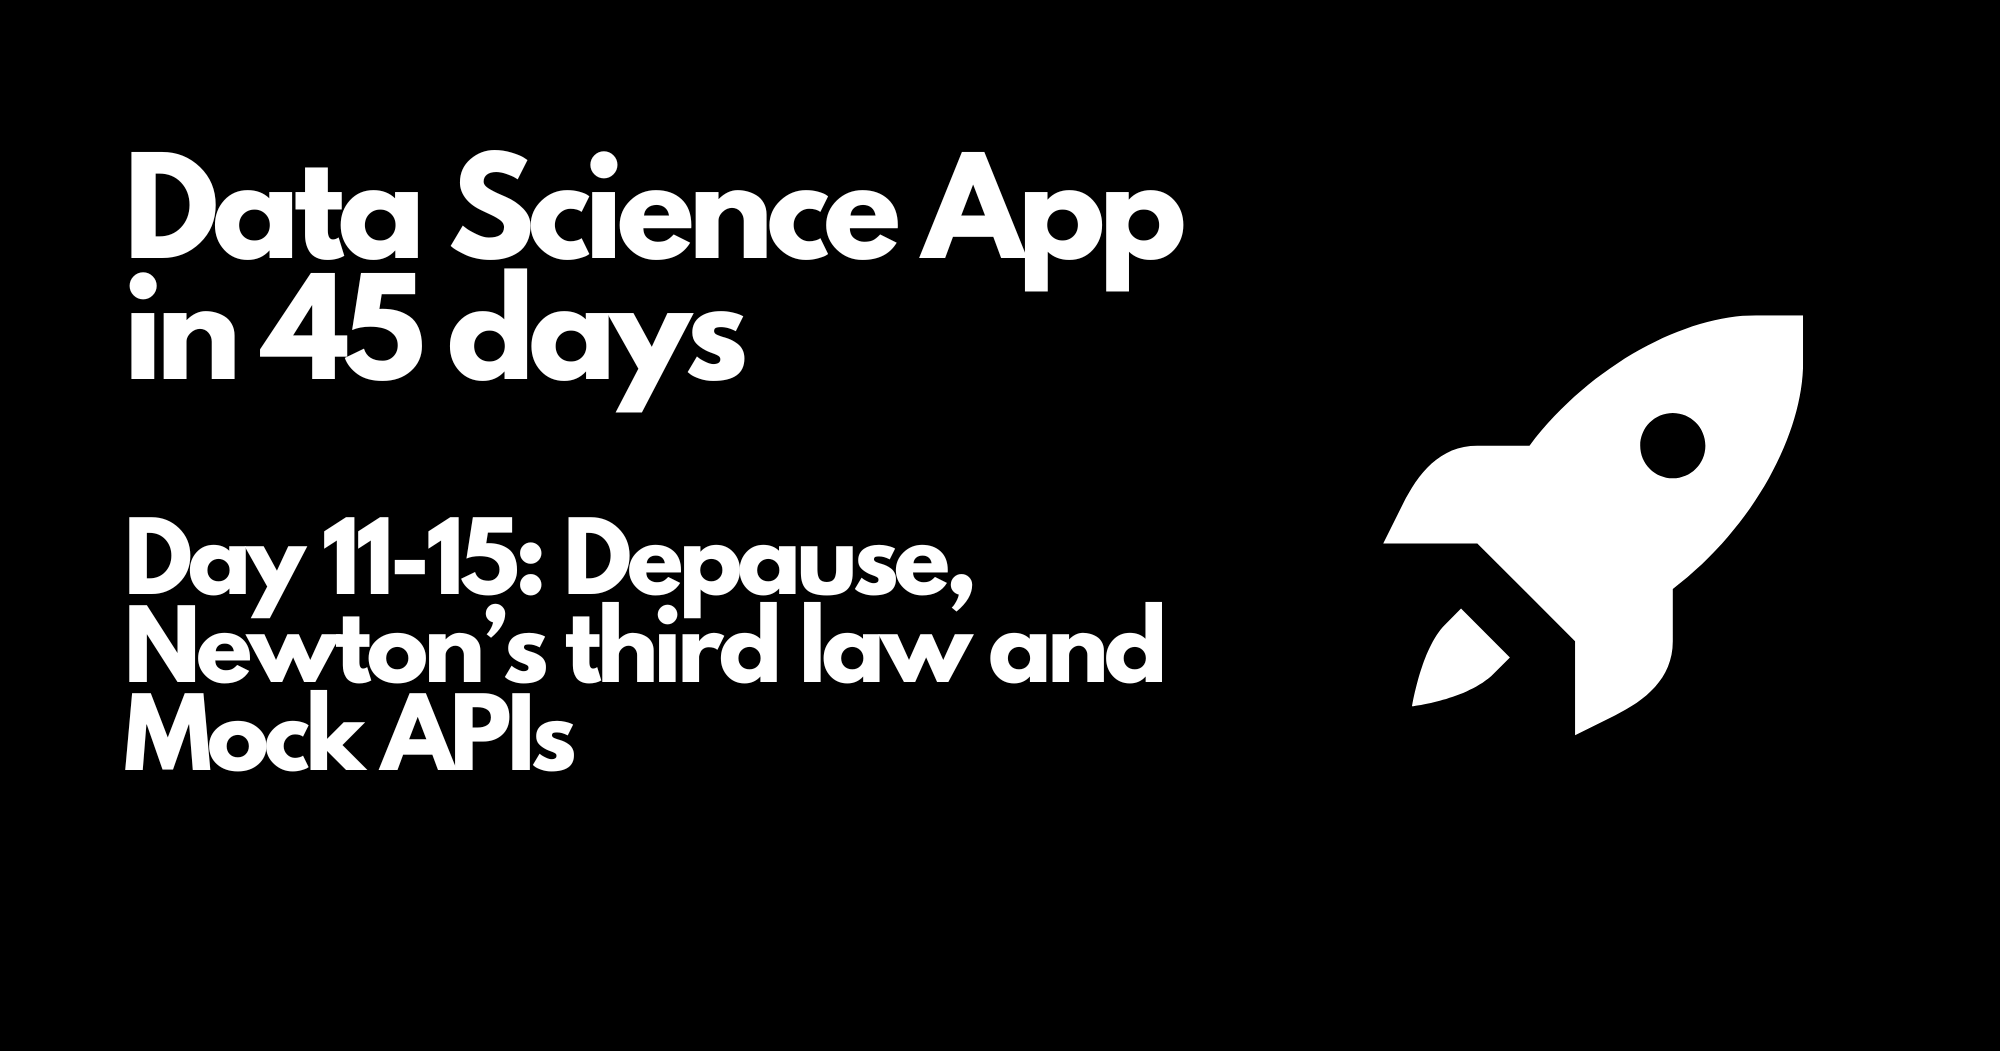 Day 11-15 - Data Science App in 45 days - Depause, Newton’s third law and Mock APIs